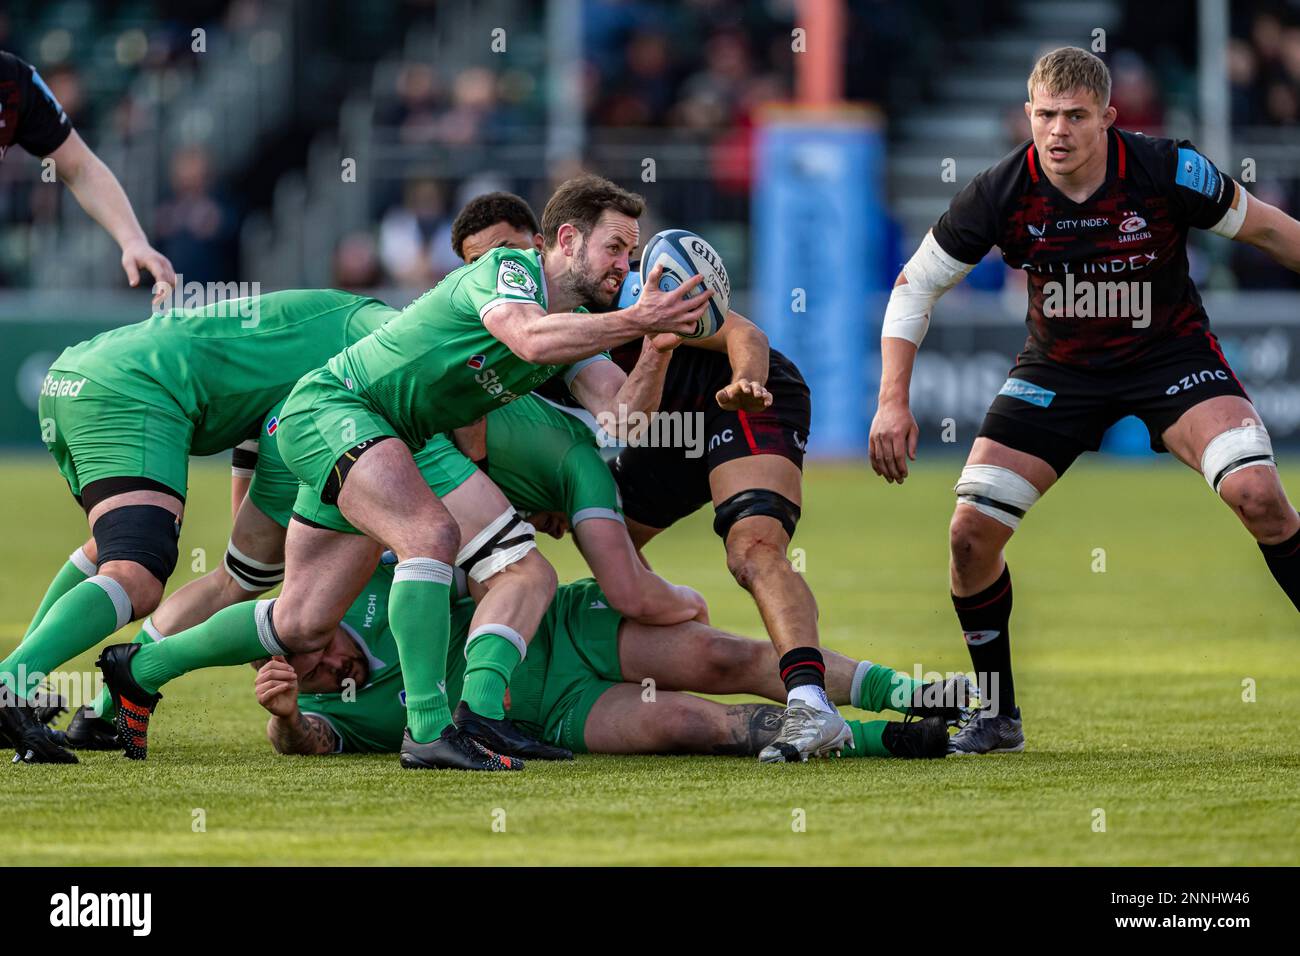 LONDON, UNITED KINGDOM. 25th, Feb 2023. Michael Young Newcastle Falcons (Capt.) (centre) in action during Gallagher Premiership Rugby Match between Saracens vs Newcastle Falcons at StoneX Stadium on Saturday, 25 February 2023. LONDON ENGLAND.  Credit: Taka G Wu/Alamy Live News Stock Photo